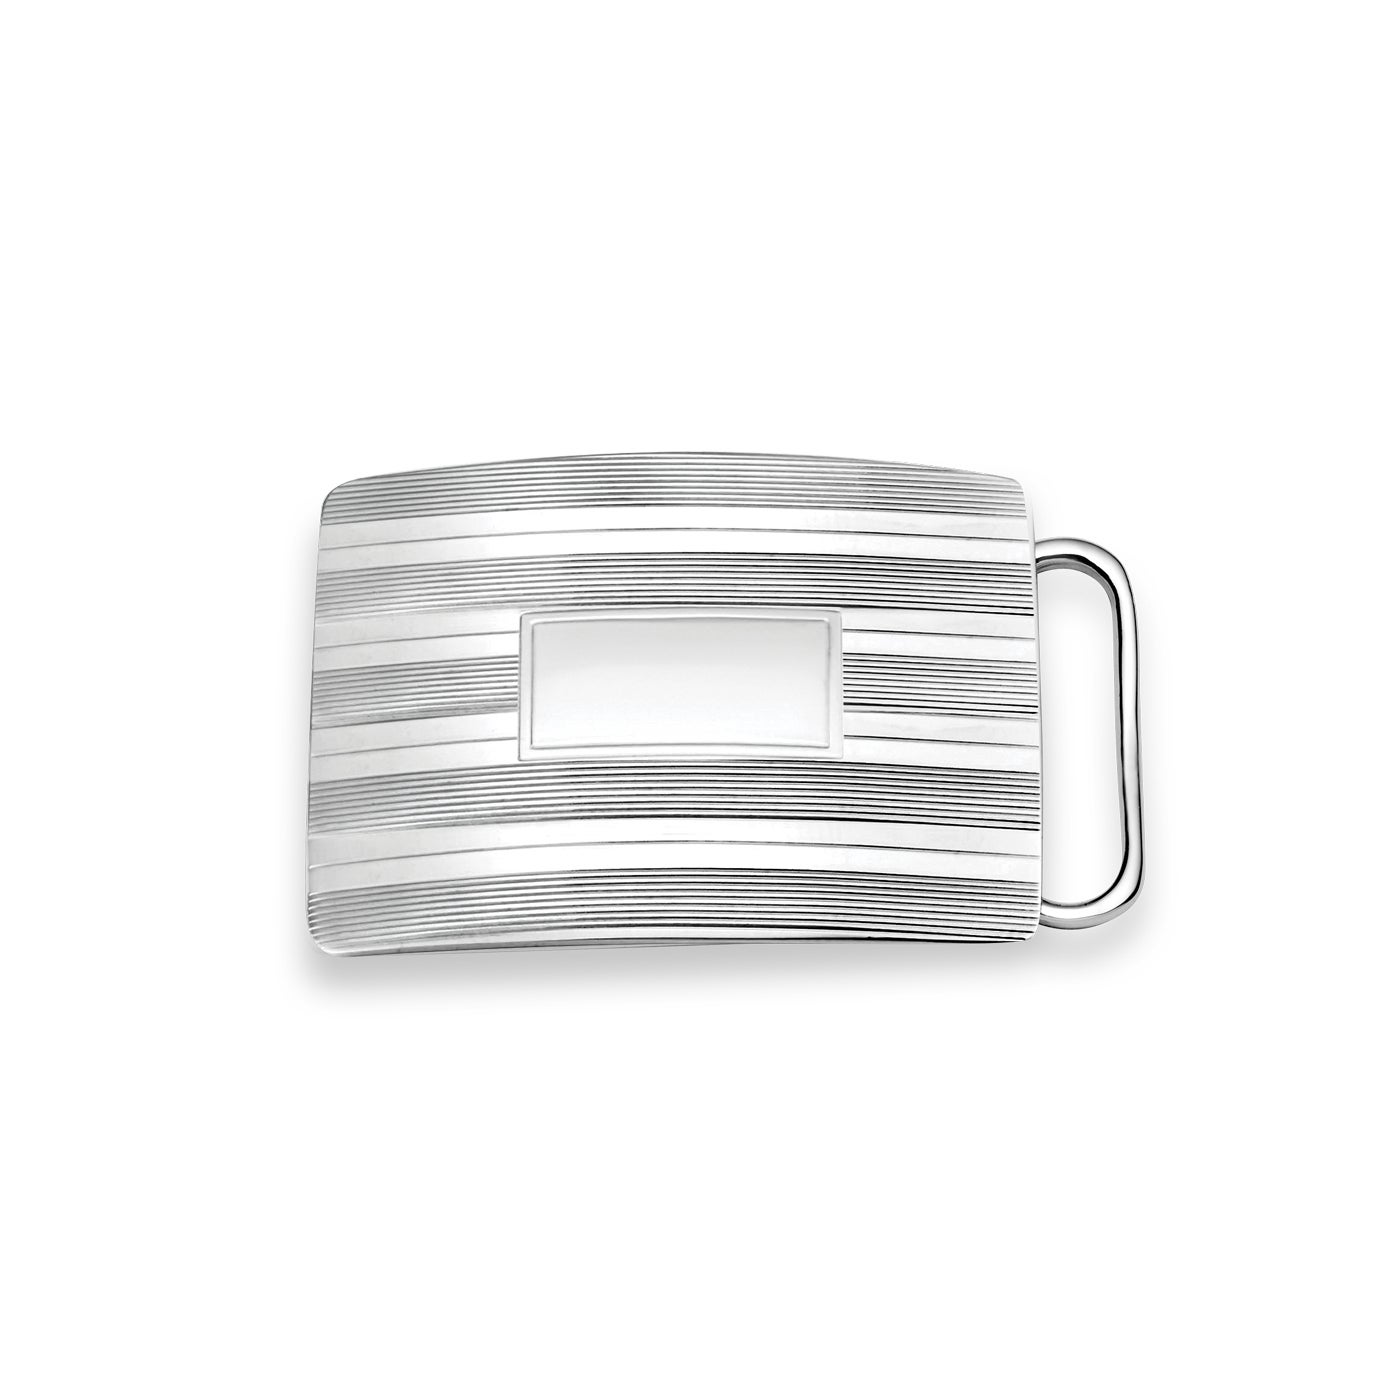 Stepped Buckle Extender Assortment In Silver Nickel Plated 7 Pieces